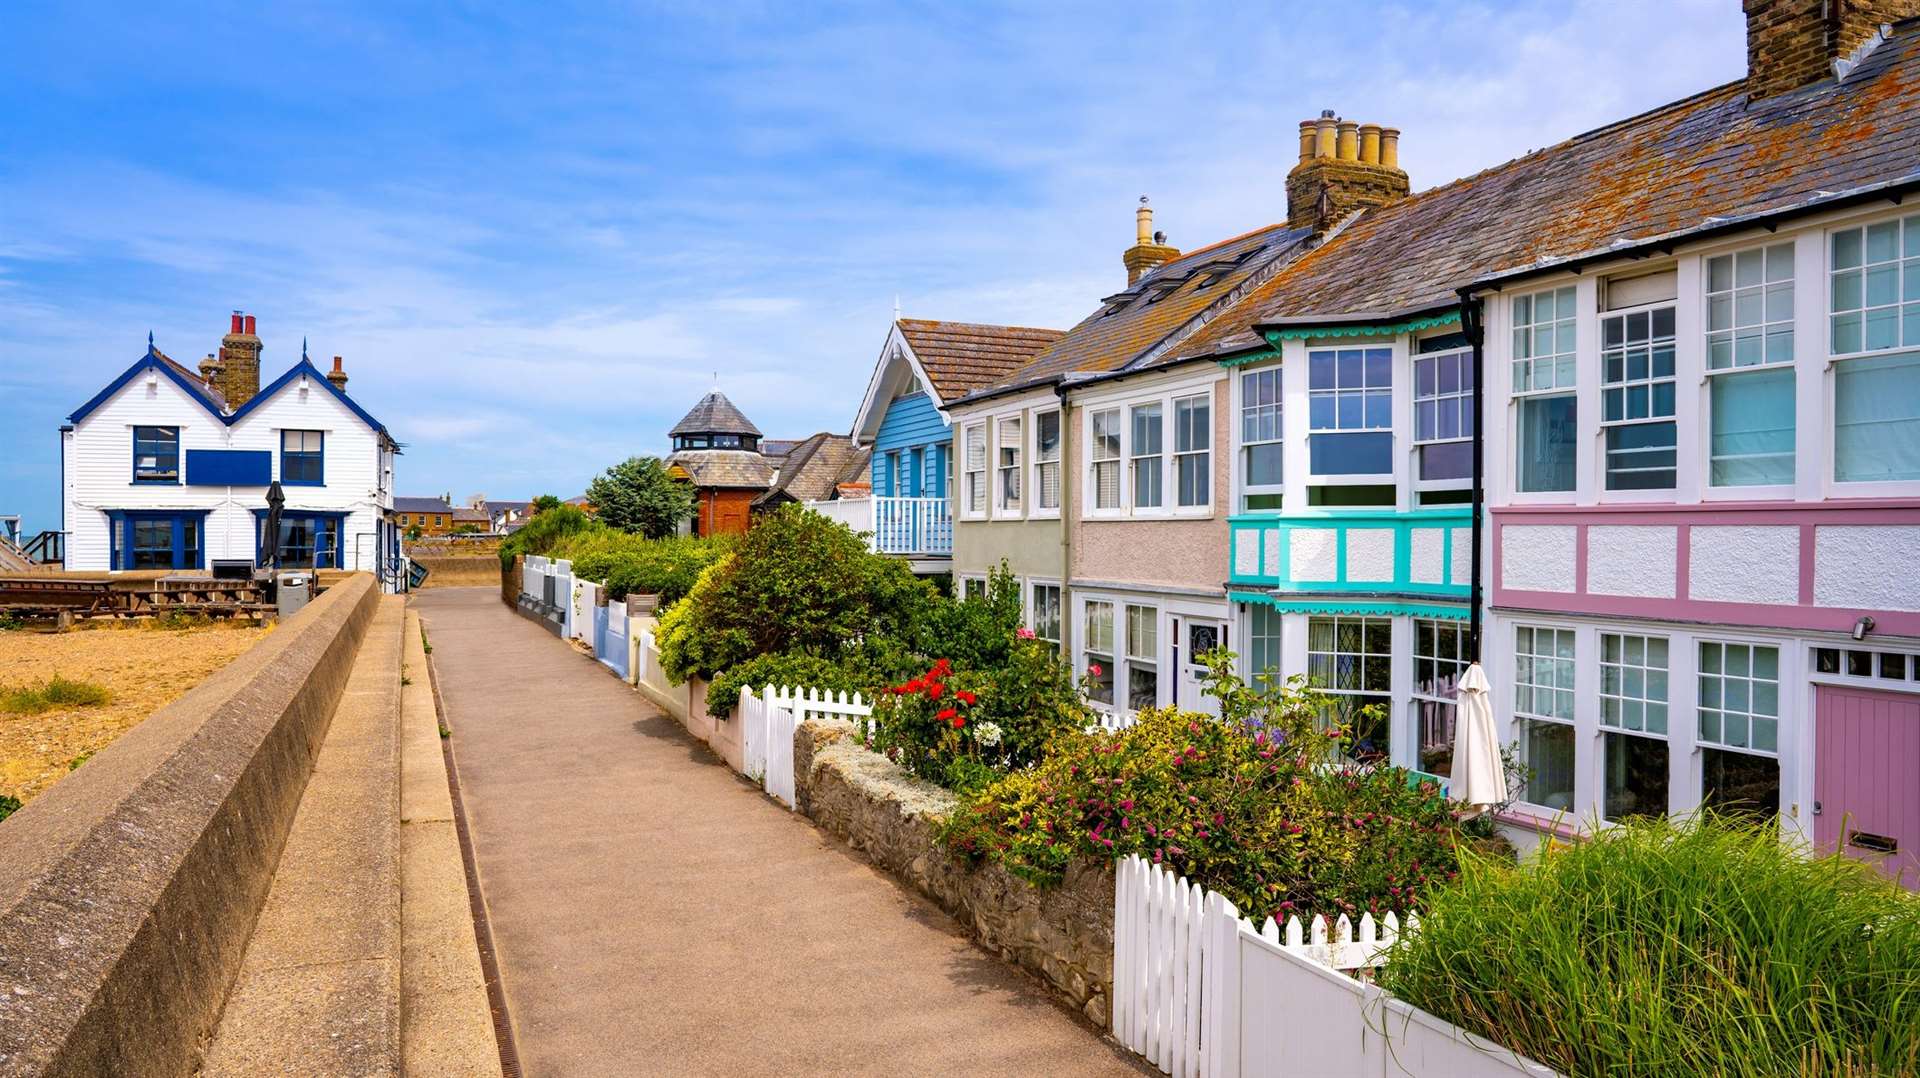 Colourful cottages along Whistable seafront. Picture: iStockphoto